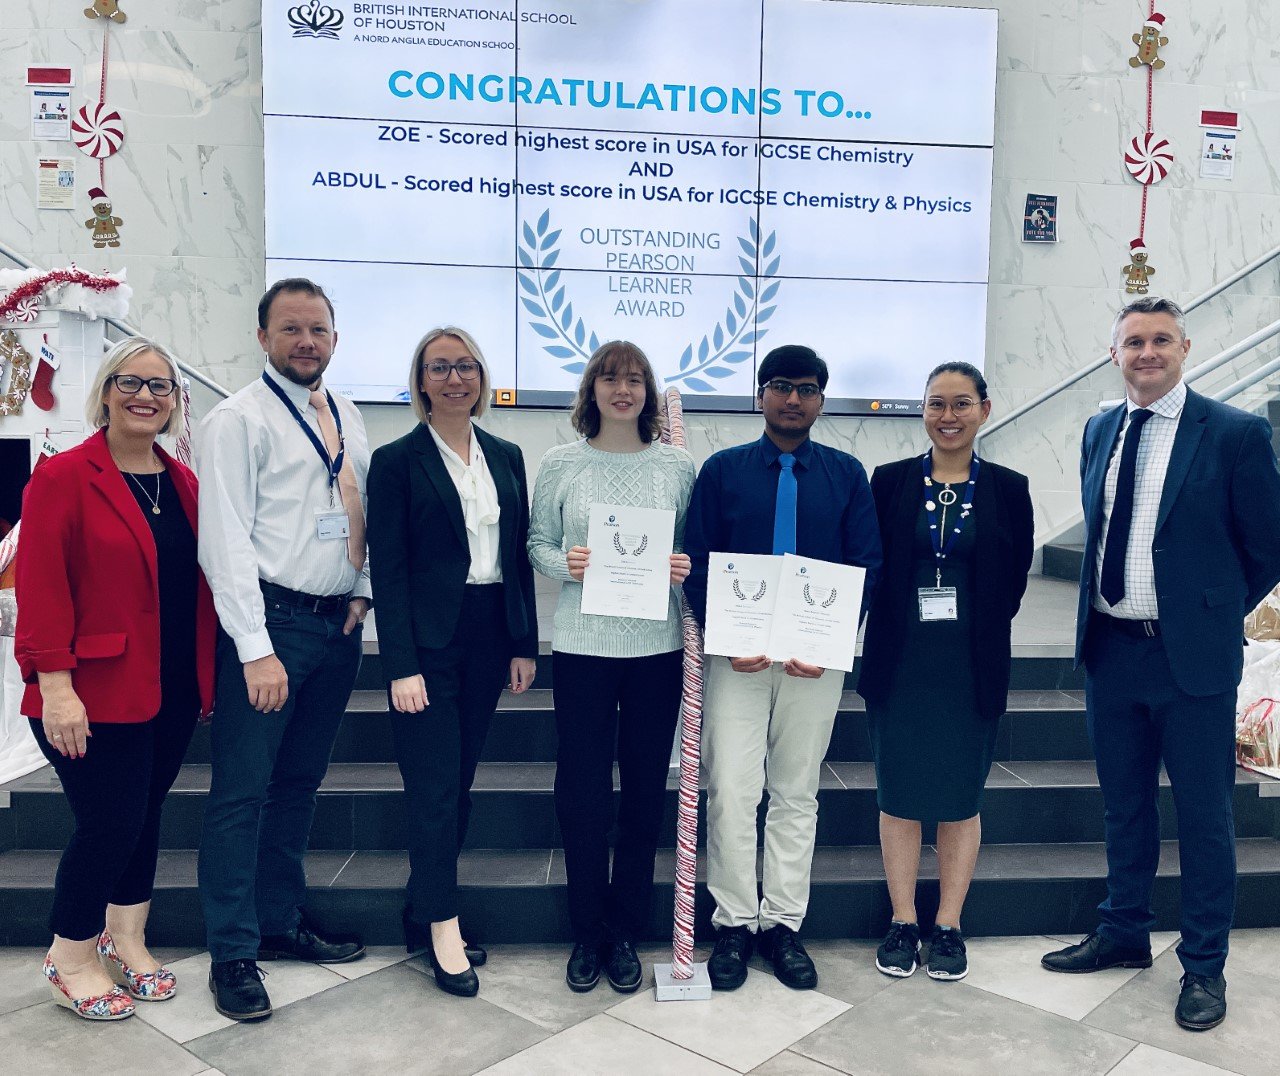 Zoe Atherton, fourth from left, and Abdul Rehman Maulana, both 10th graders at the British International School of Houston, display their awards for academic achievement.